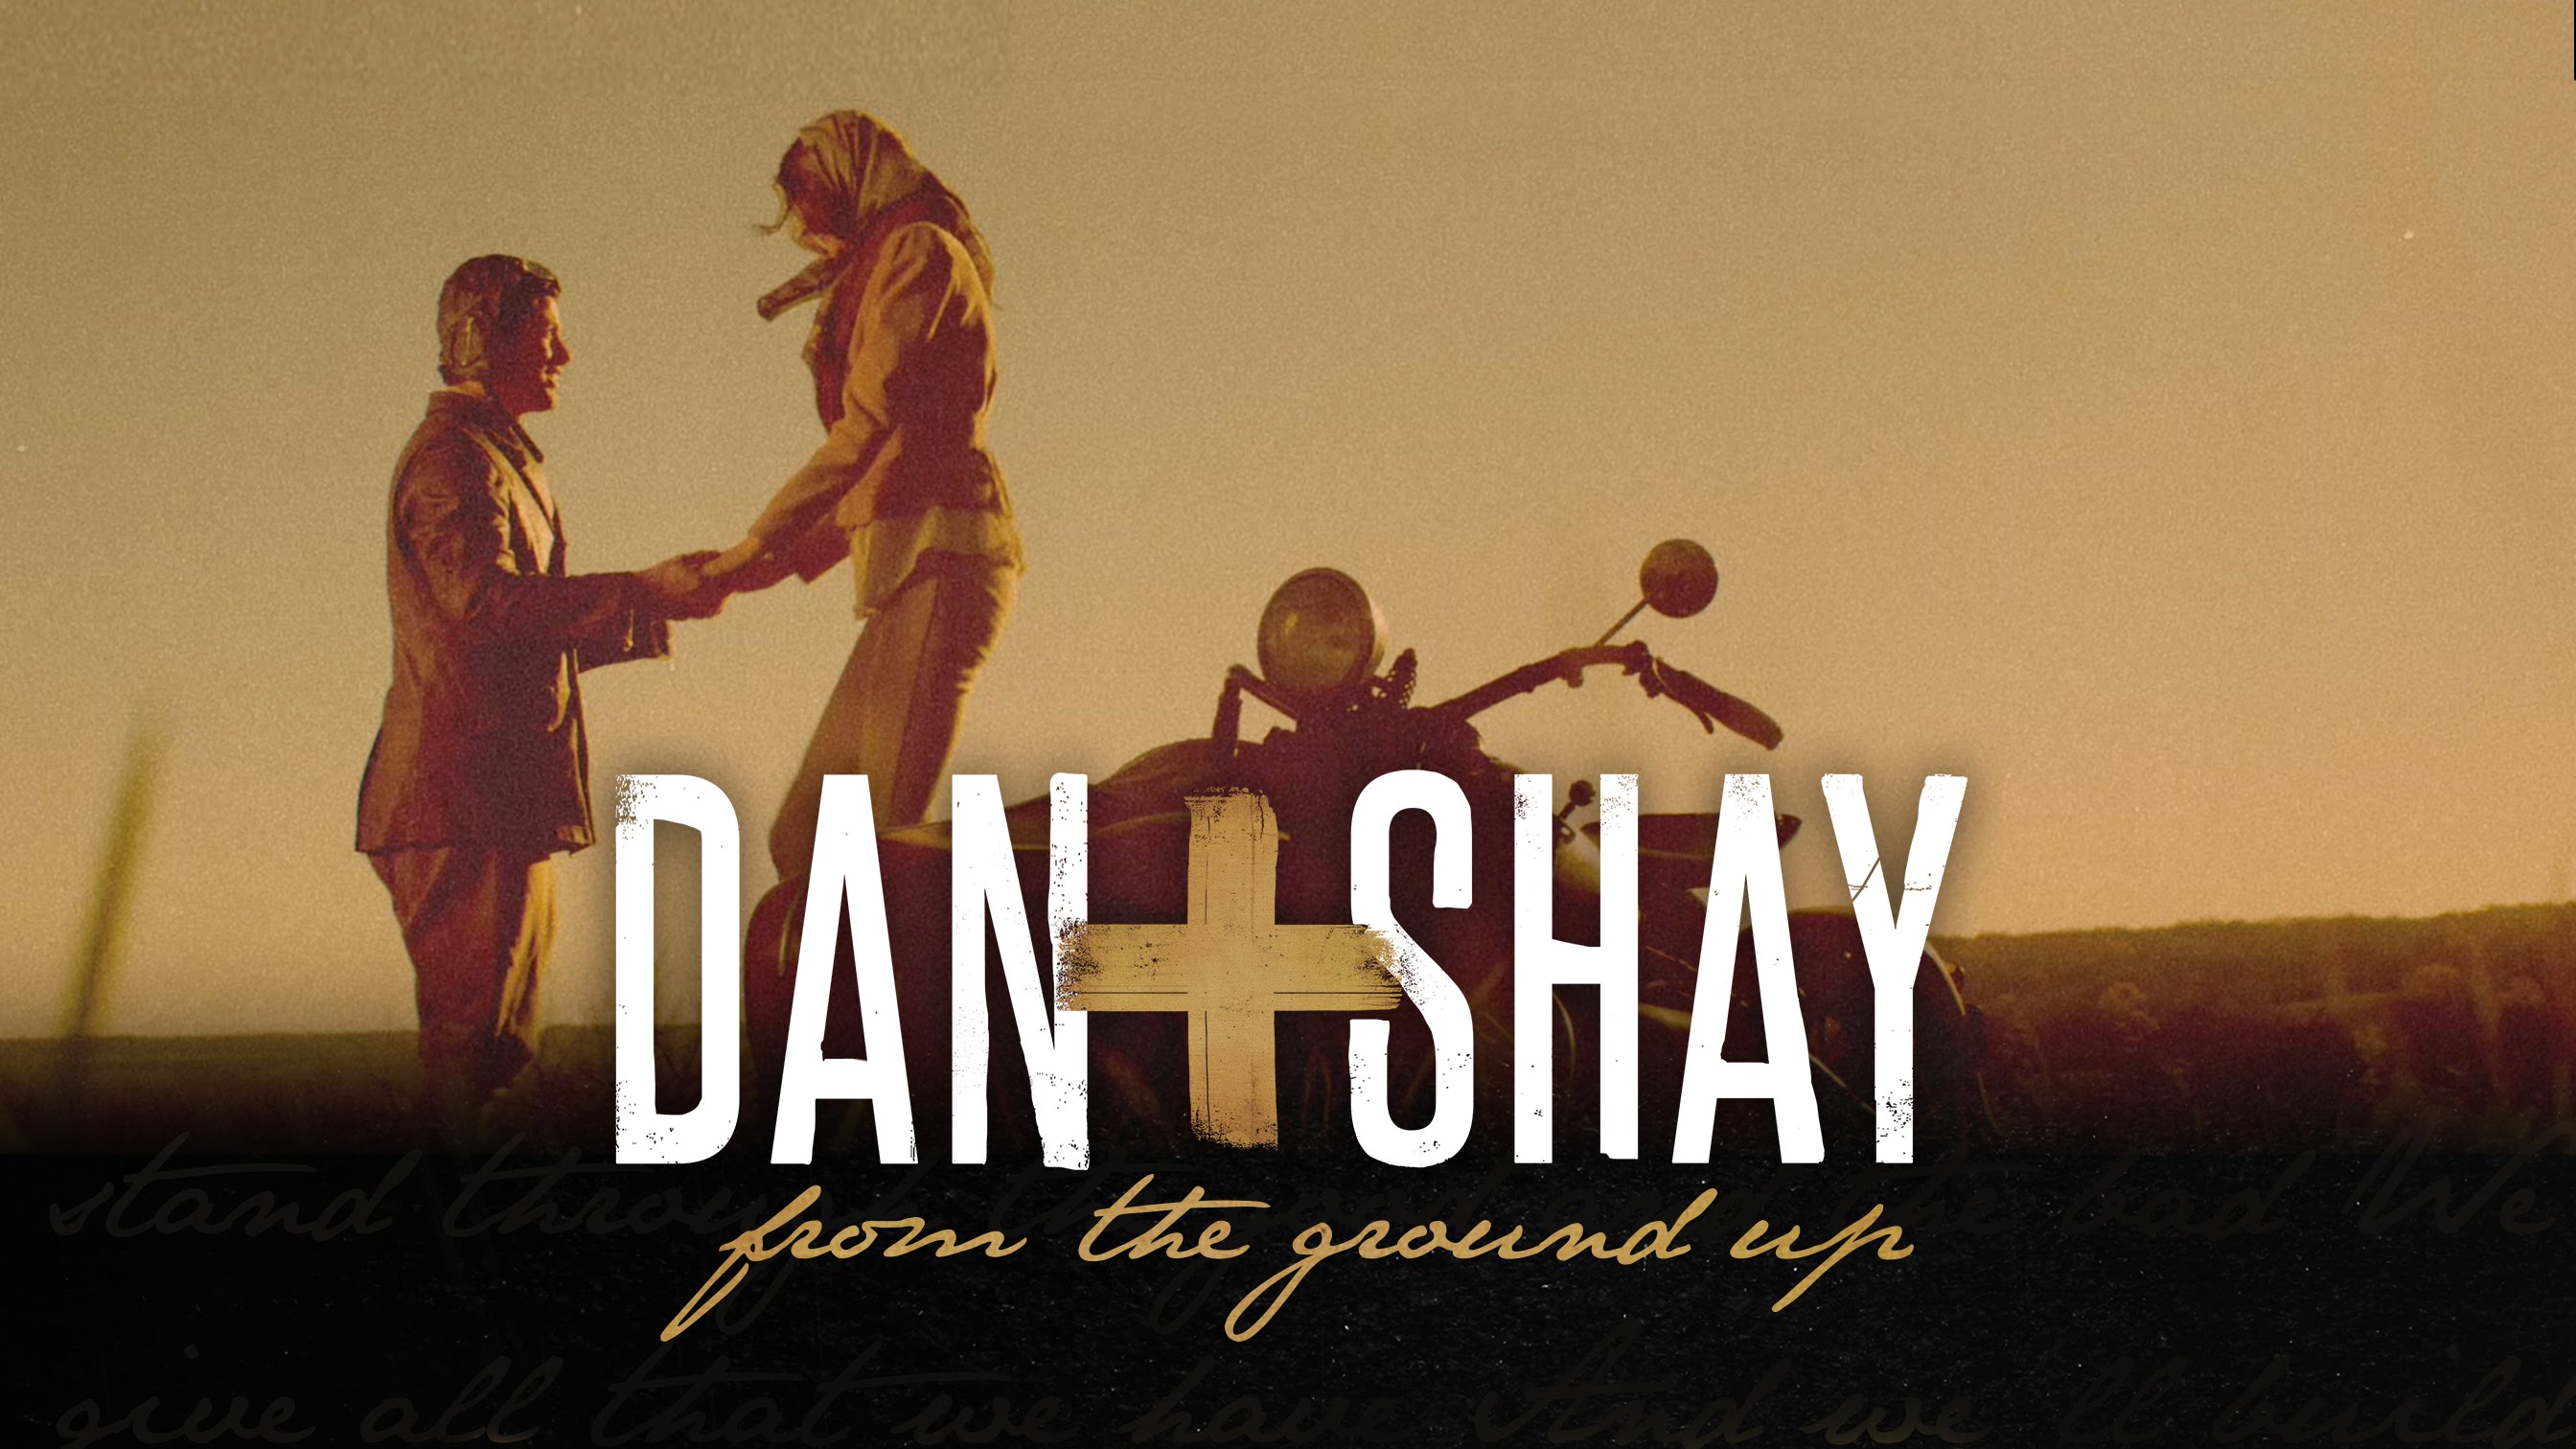 Dan + Shay – From The Ground Up